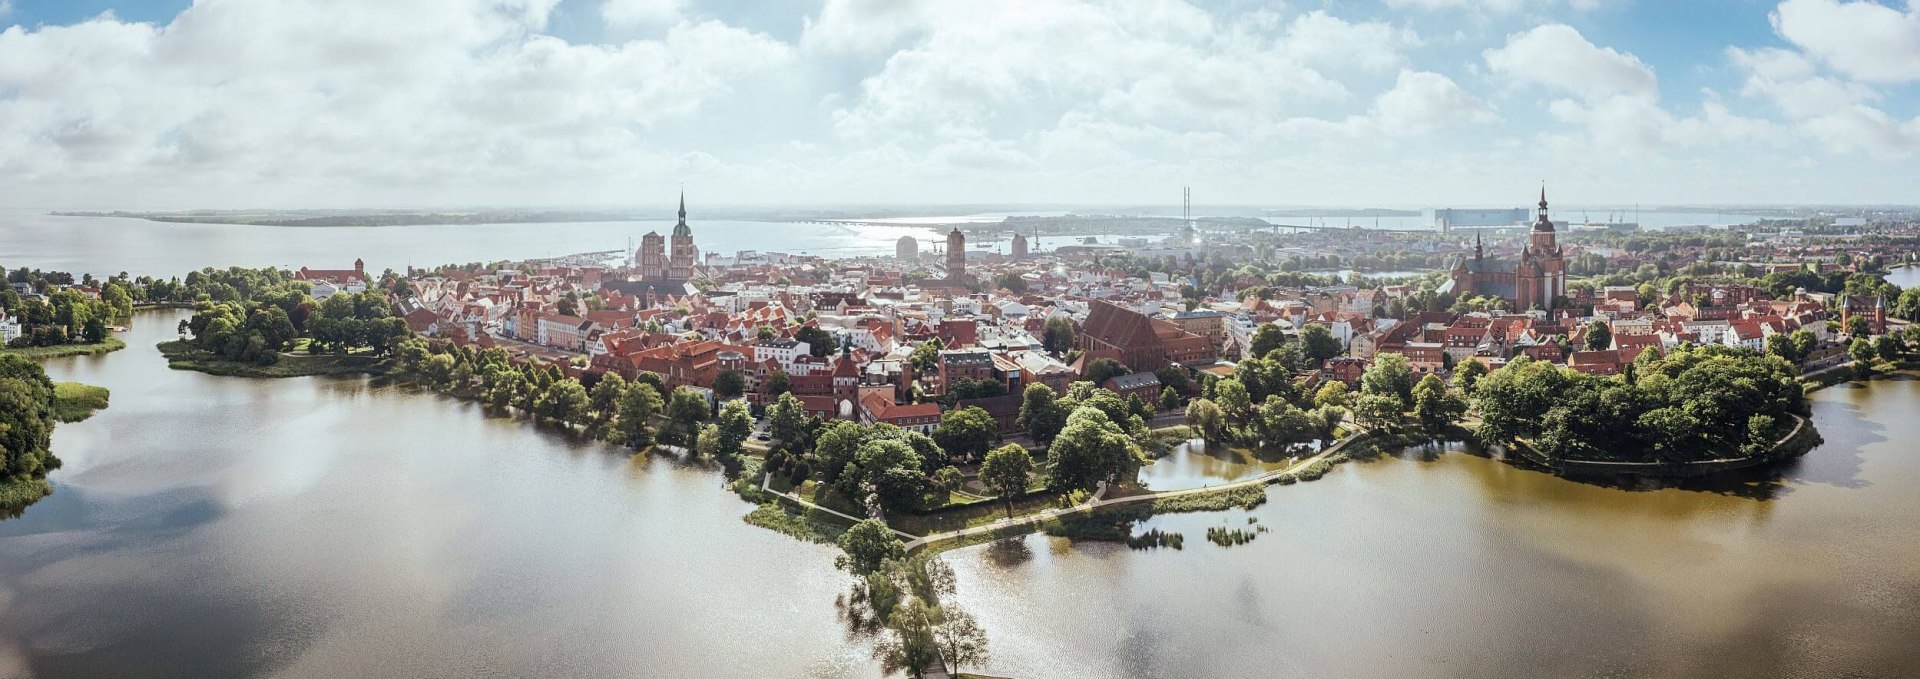 View of the old town of the Hanseatic City of Stralsund, © TMV/Gänsicke